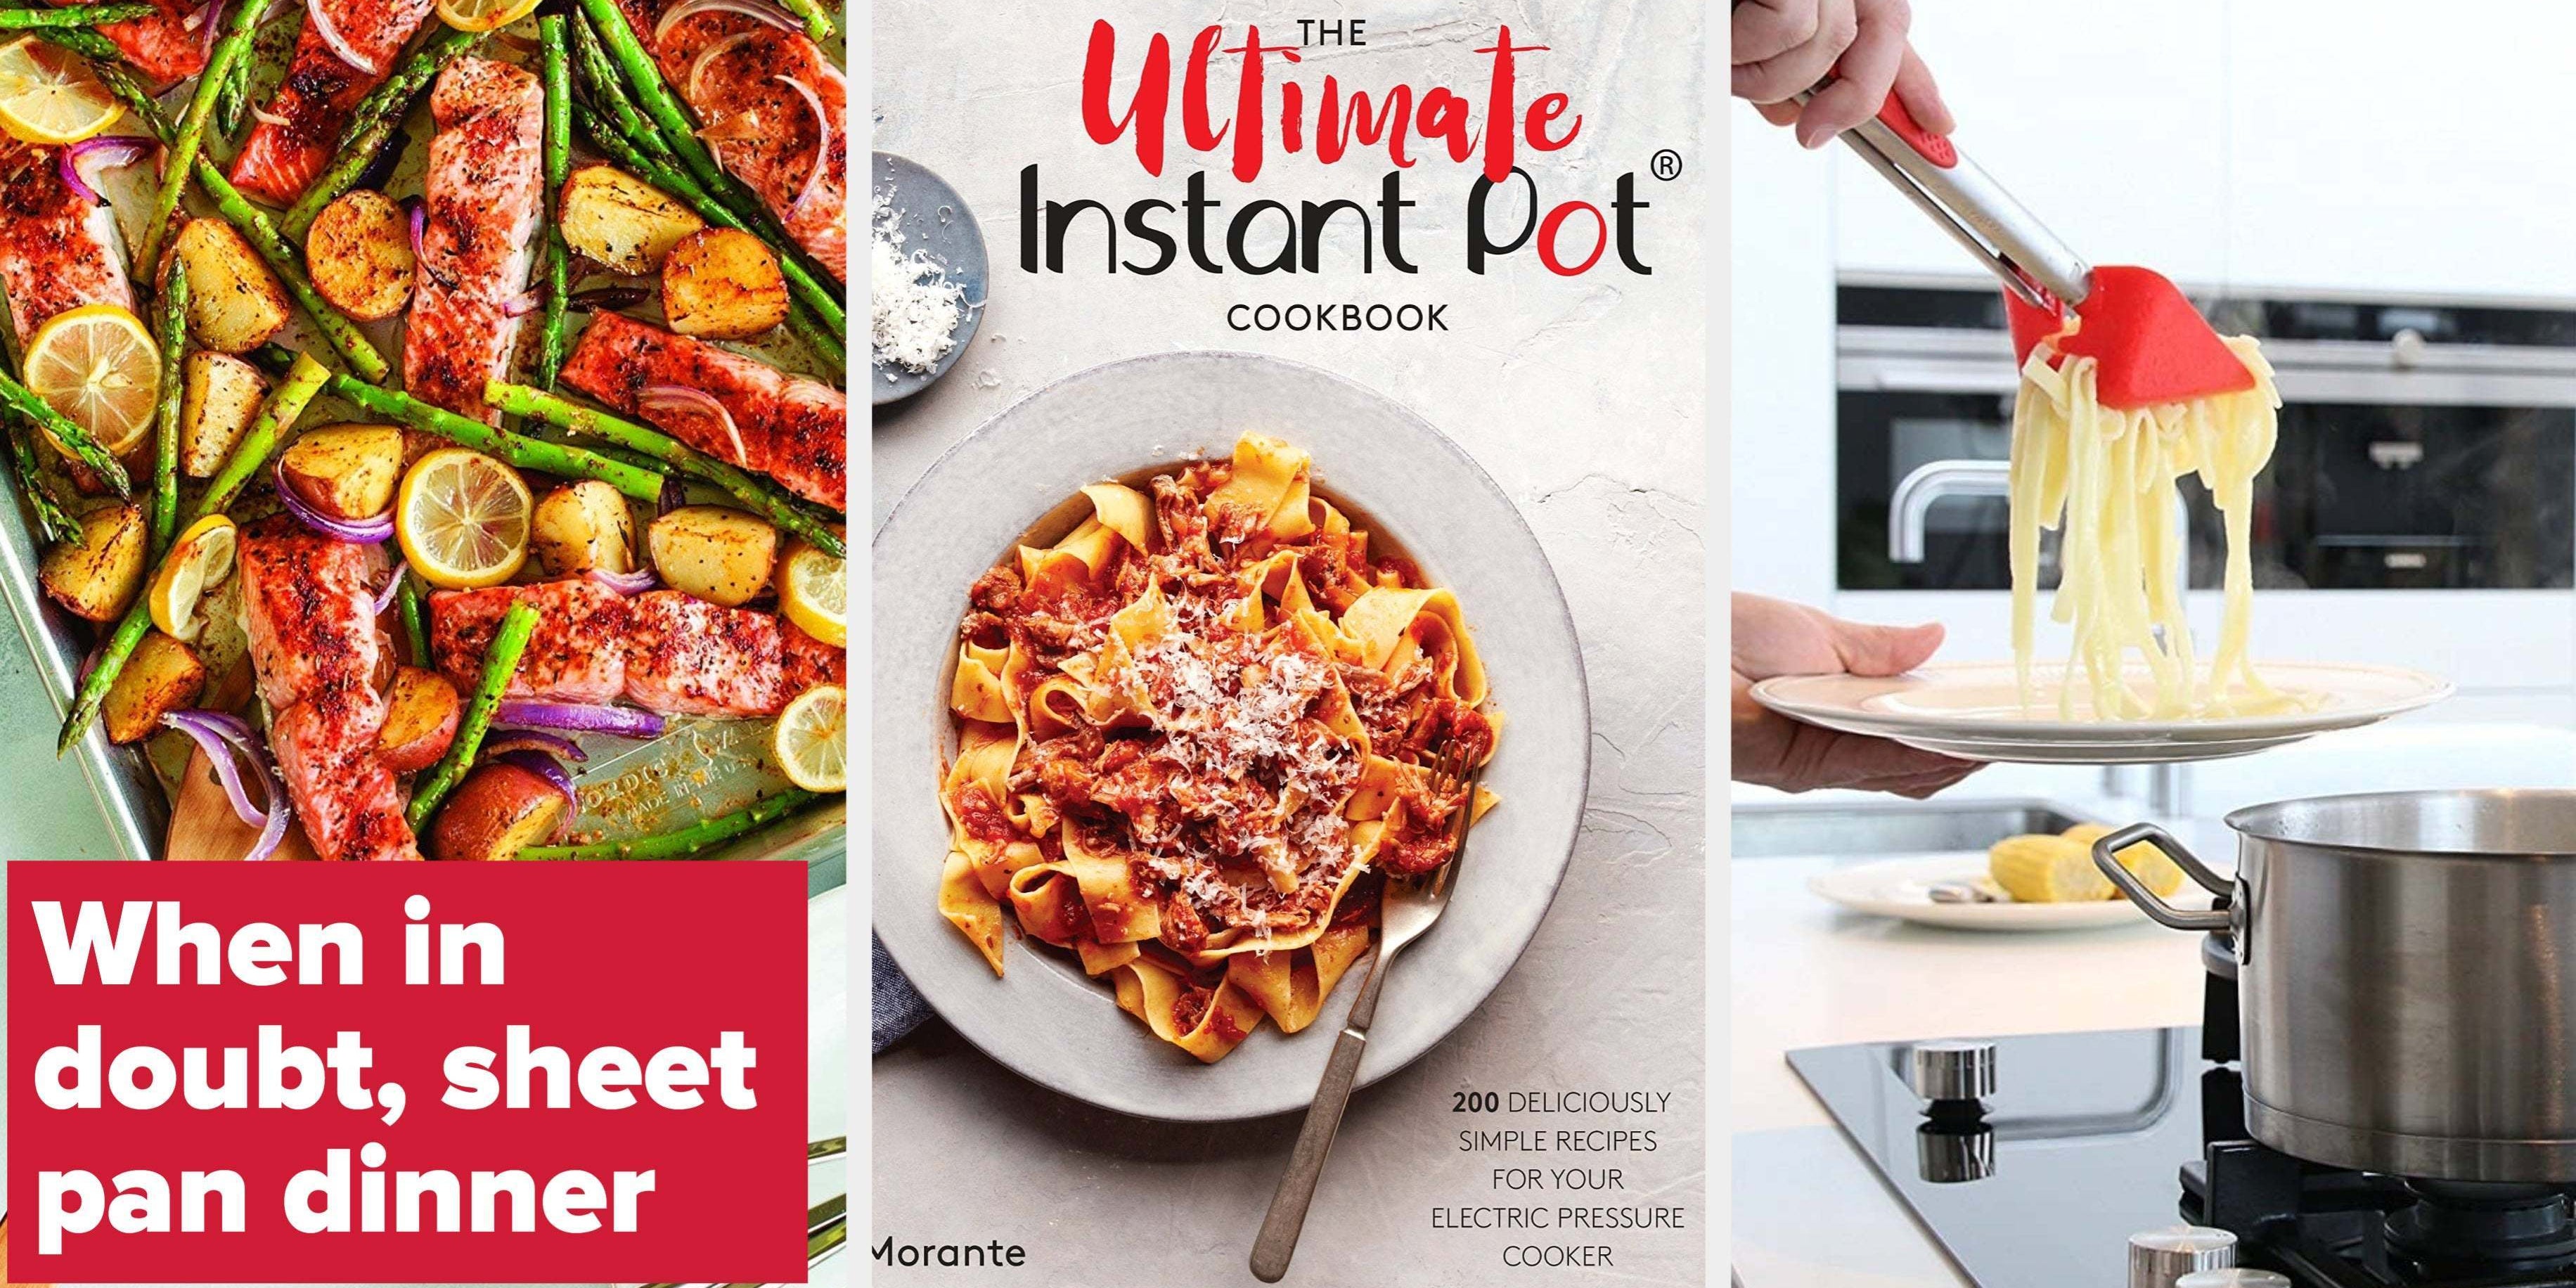 31 Kitchen Products For Anyone Who's Bad At Cooking